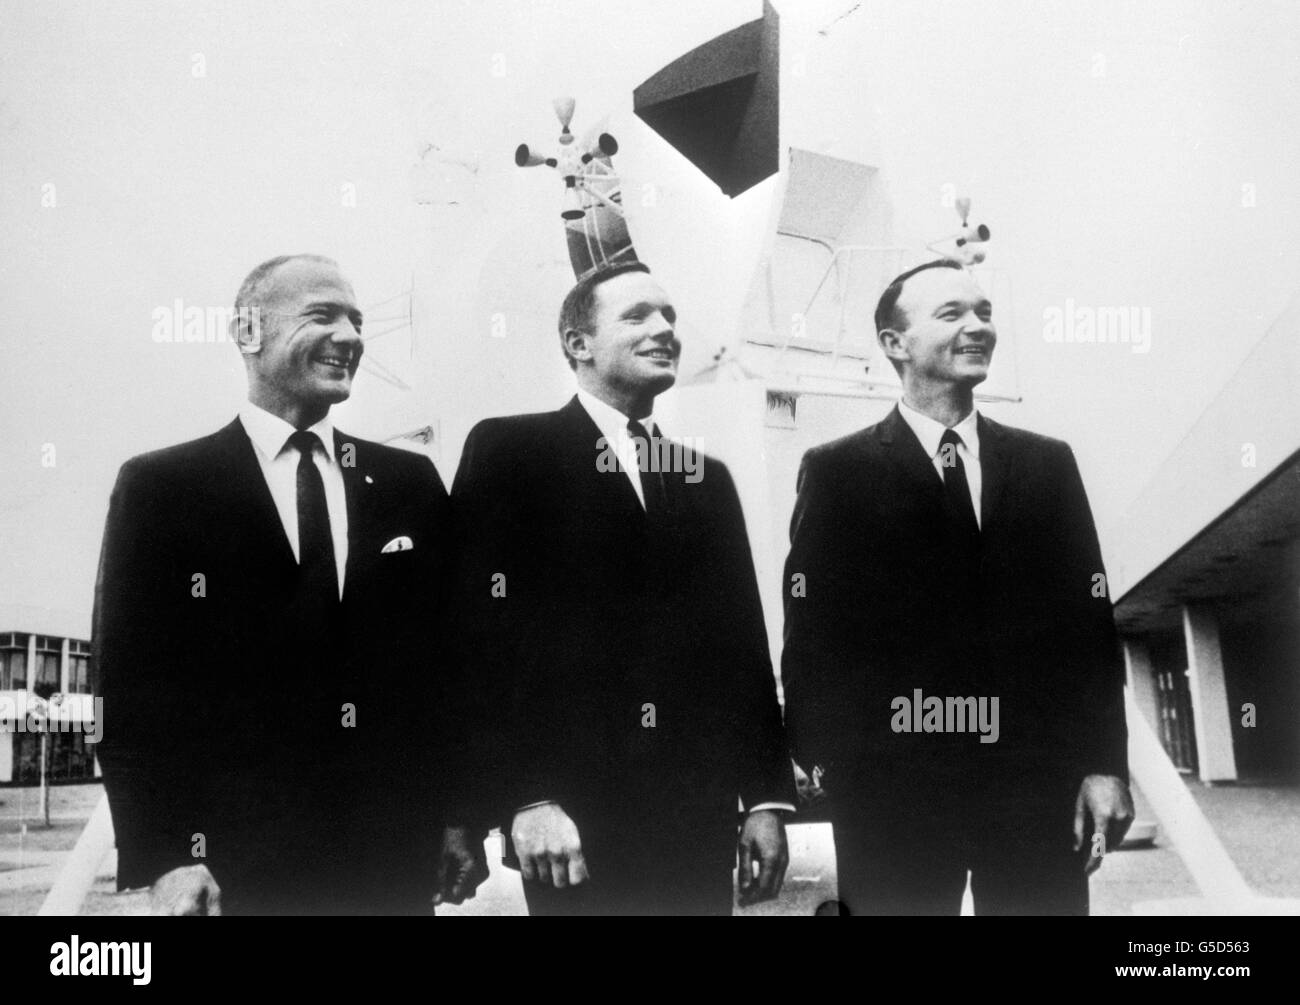 Crewmen for the Apollo 11 flight pose at the Manned Spacecraft Centre, Houston, Texas, in front of a mock up of the craft that is scheduled to carry two of them to the surface of the Moon. From left to right; US Air Force Colonel Edwin 'Buzz' Aldrin; Neil Armstrong, the civilian who will command the mission, and Lt. Colonel Michael Collins, who will remain in the capsule in lunar orbit during the landing attempt. Stock Photo